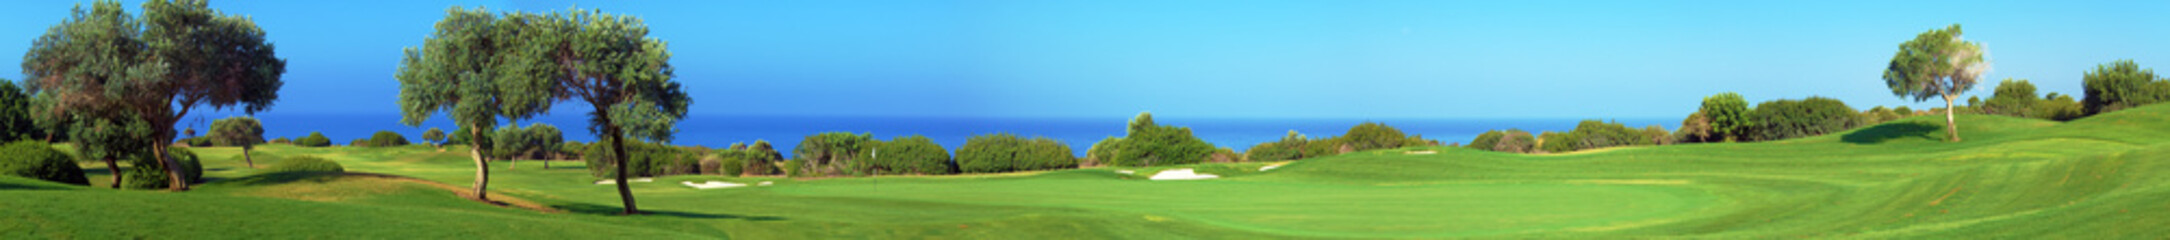 Panorama of Golf field, sea and olives - 45343035